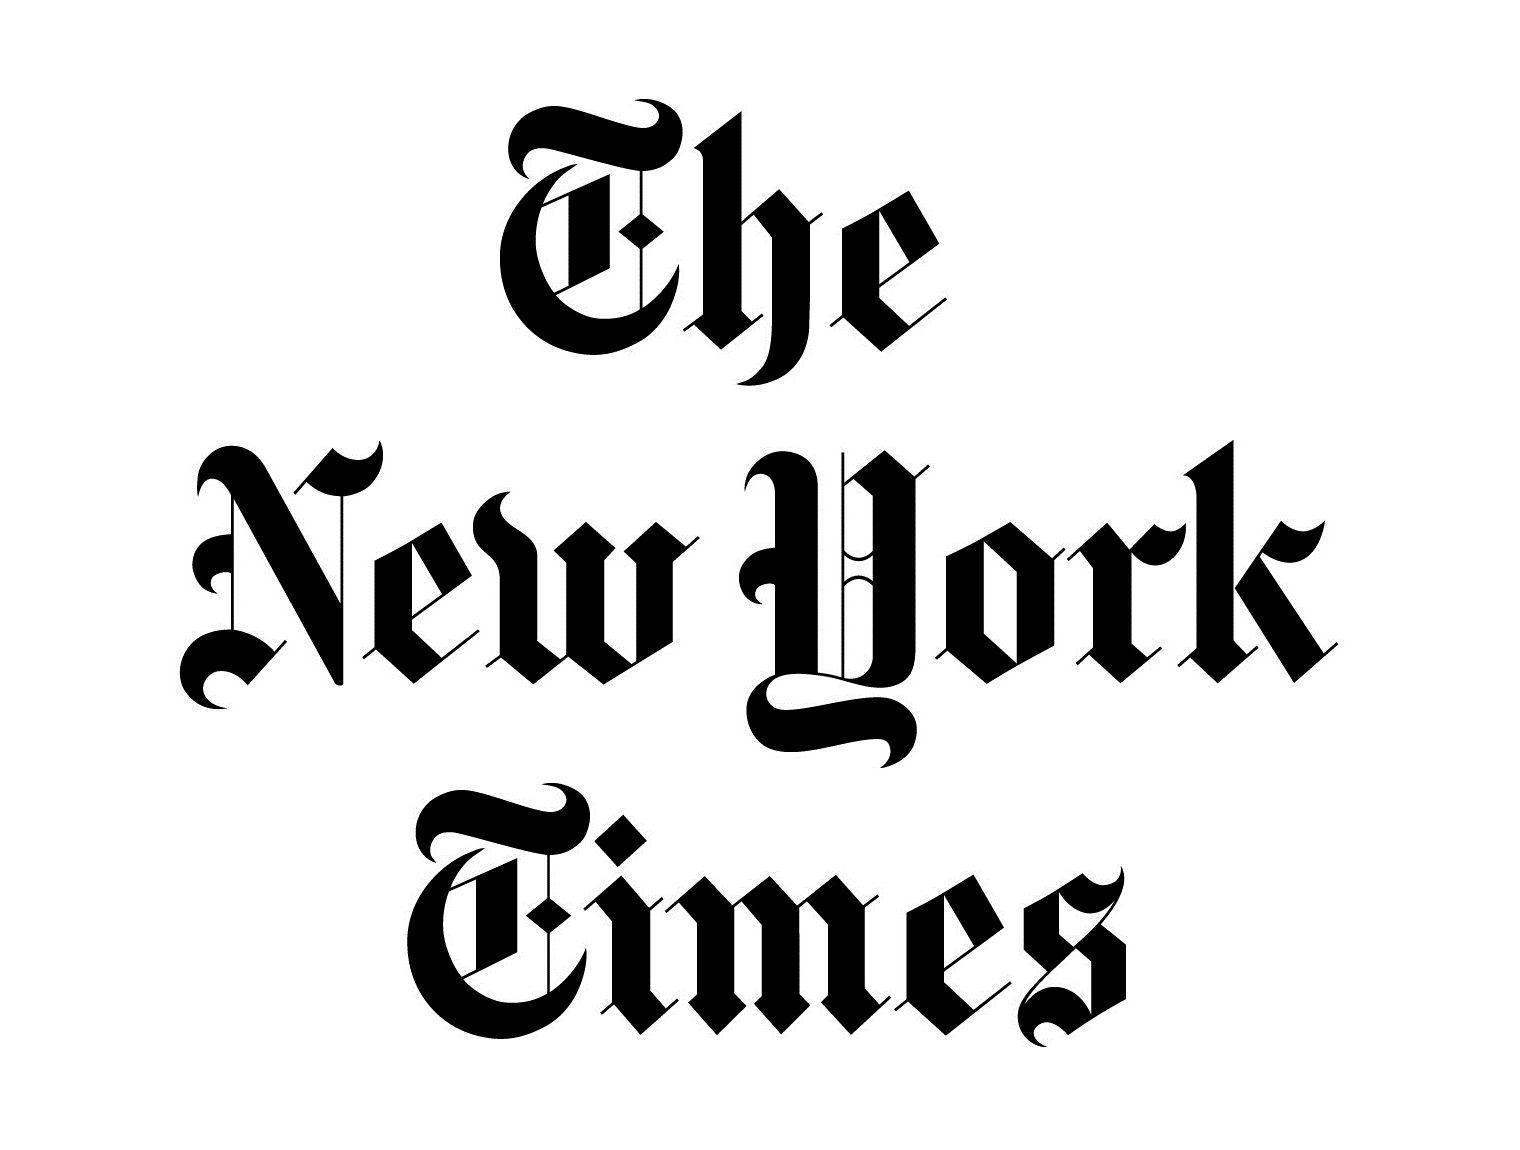 New York Times Logo - New York Times Logo, New York Times Symbol, Meaning, History